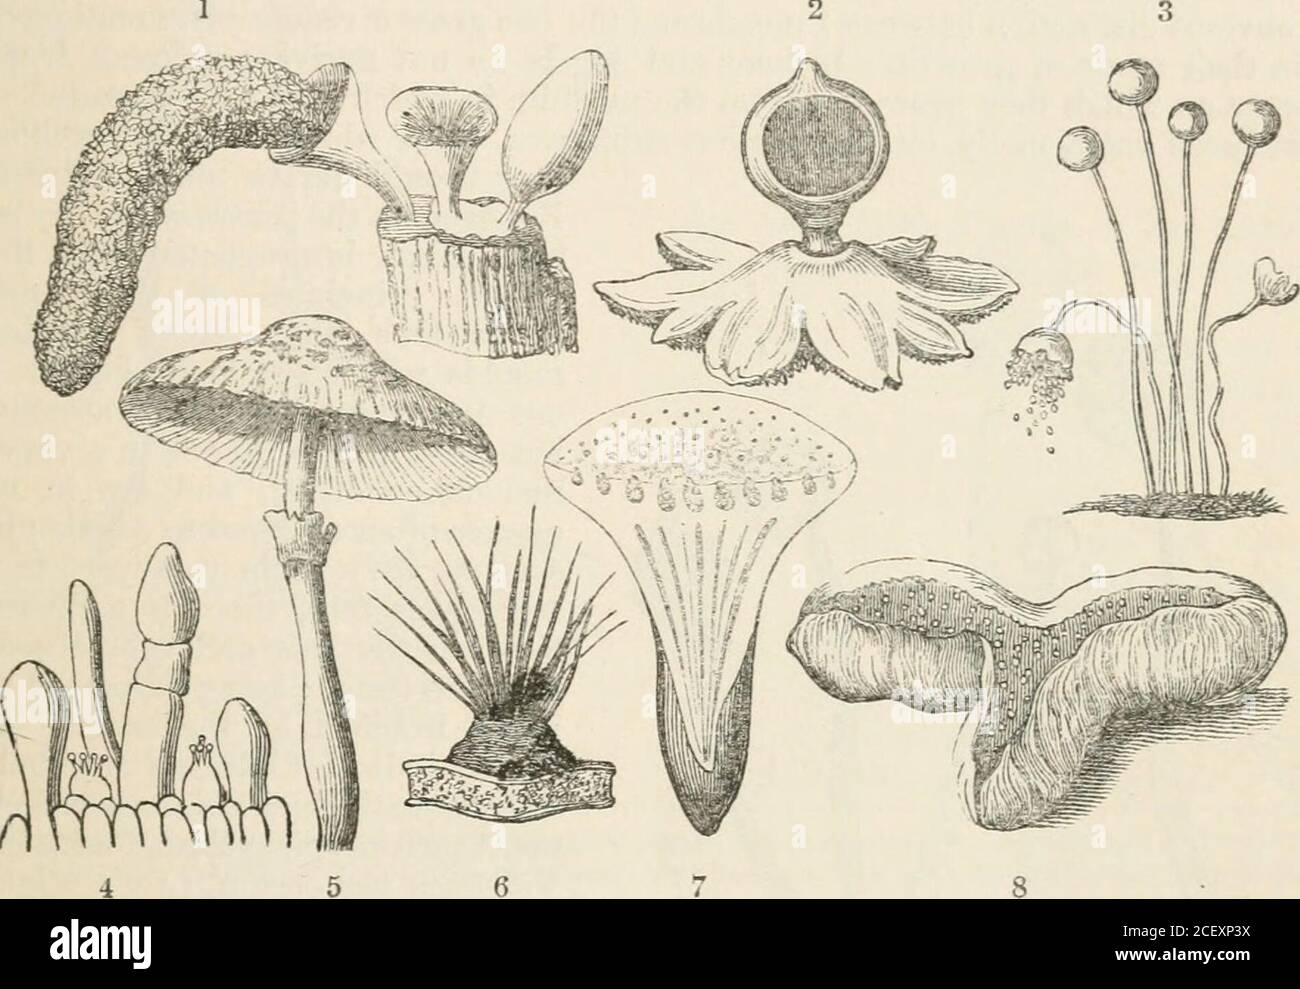 . The vegetable kingdom : or, The structure, classification, and uses of plants, illustrated upon the natural system. l Alliance.* Fungi, Jtiss. Gen. 3. (1789) ; DC. Fl. Fr. 2. 65. (1815) ; Nees das Si/stem der Pilze und Schwdmrne,(1817); Fries Syst. Mycolog. (1821) ; 8yst. Orb. Veg. (1825) ; Elench. Fung. (1828) ; AdolpheBrongn. in Diet. Class. 5. 155. (1824) ; Grev. Scott. Crypt. Fl. 6. (1828) ; Hooker British Flora,457. (1830) ; Berk, in Id. vol. 2. pt.2. (1835); Montagne in Hist, de Cuba Bot. p. 239. (1838-1842),translated, with Notes, in Ann. of Nat. Hist. vol. 9. p. 1. by Berk. (1842; ; Stock Photo